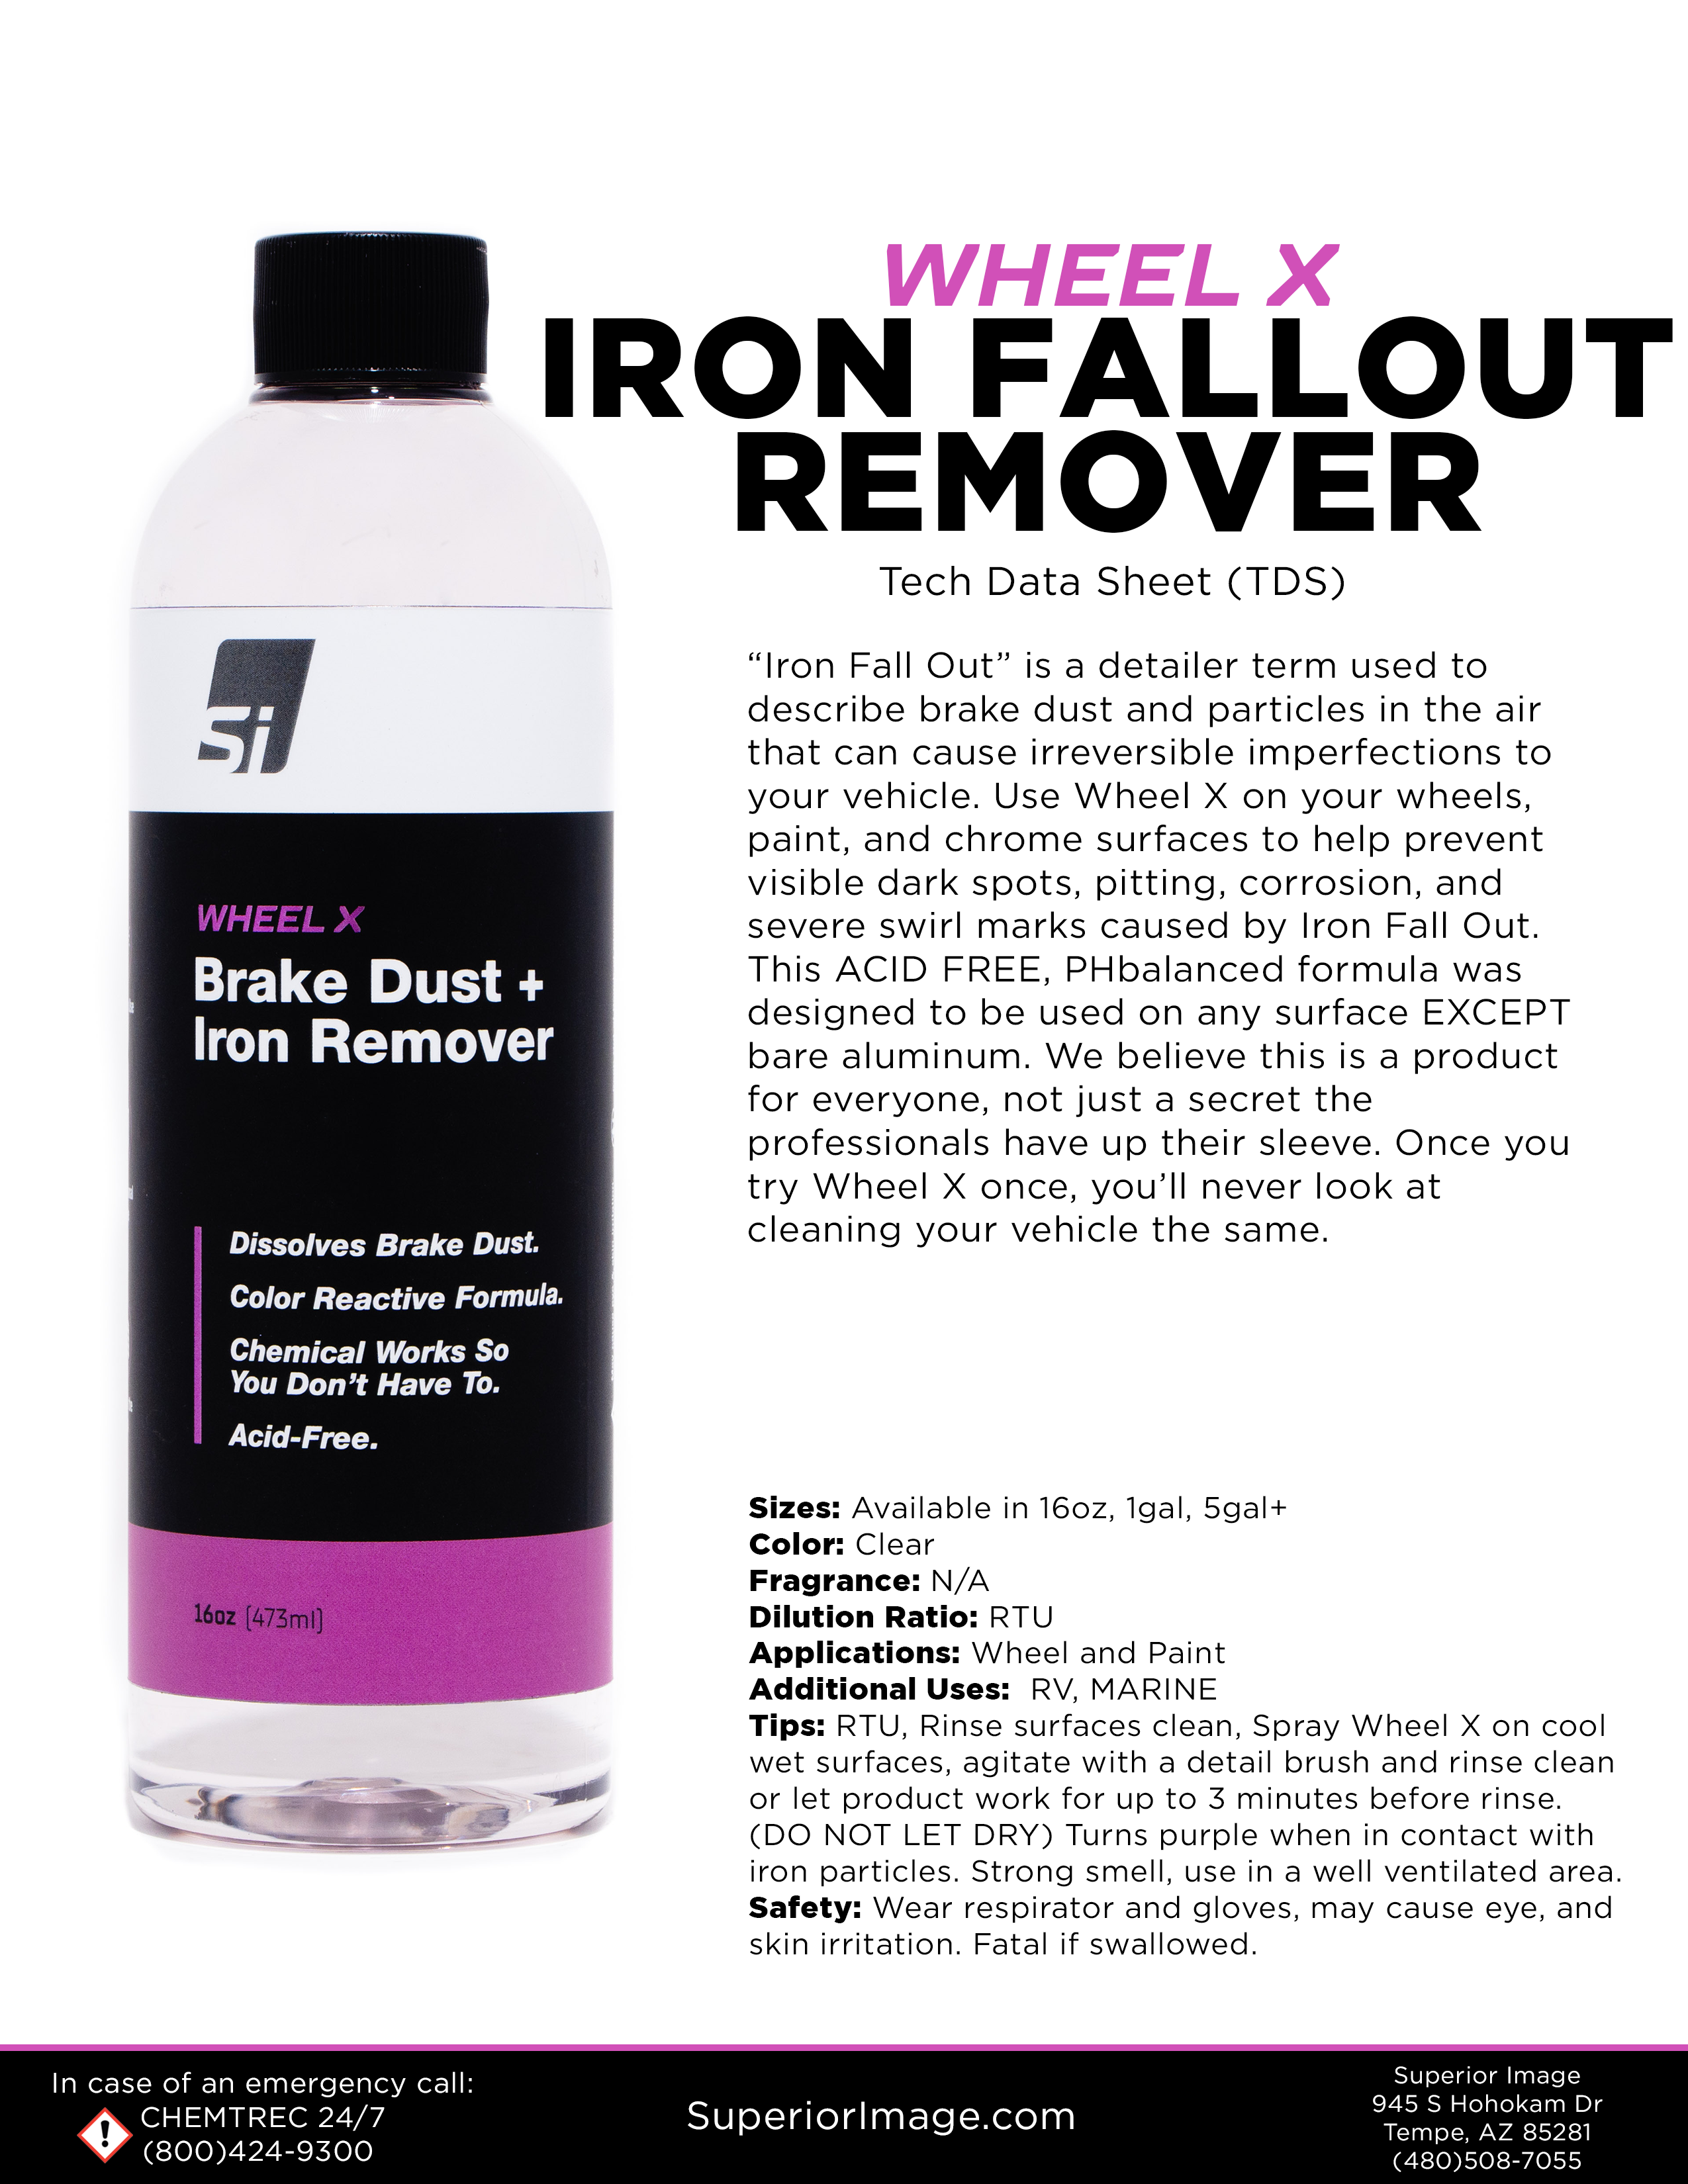 Which Fallout Remover is best? Iron X vs TRIX vs Iron Maiden 